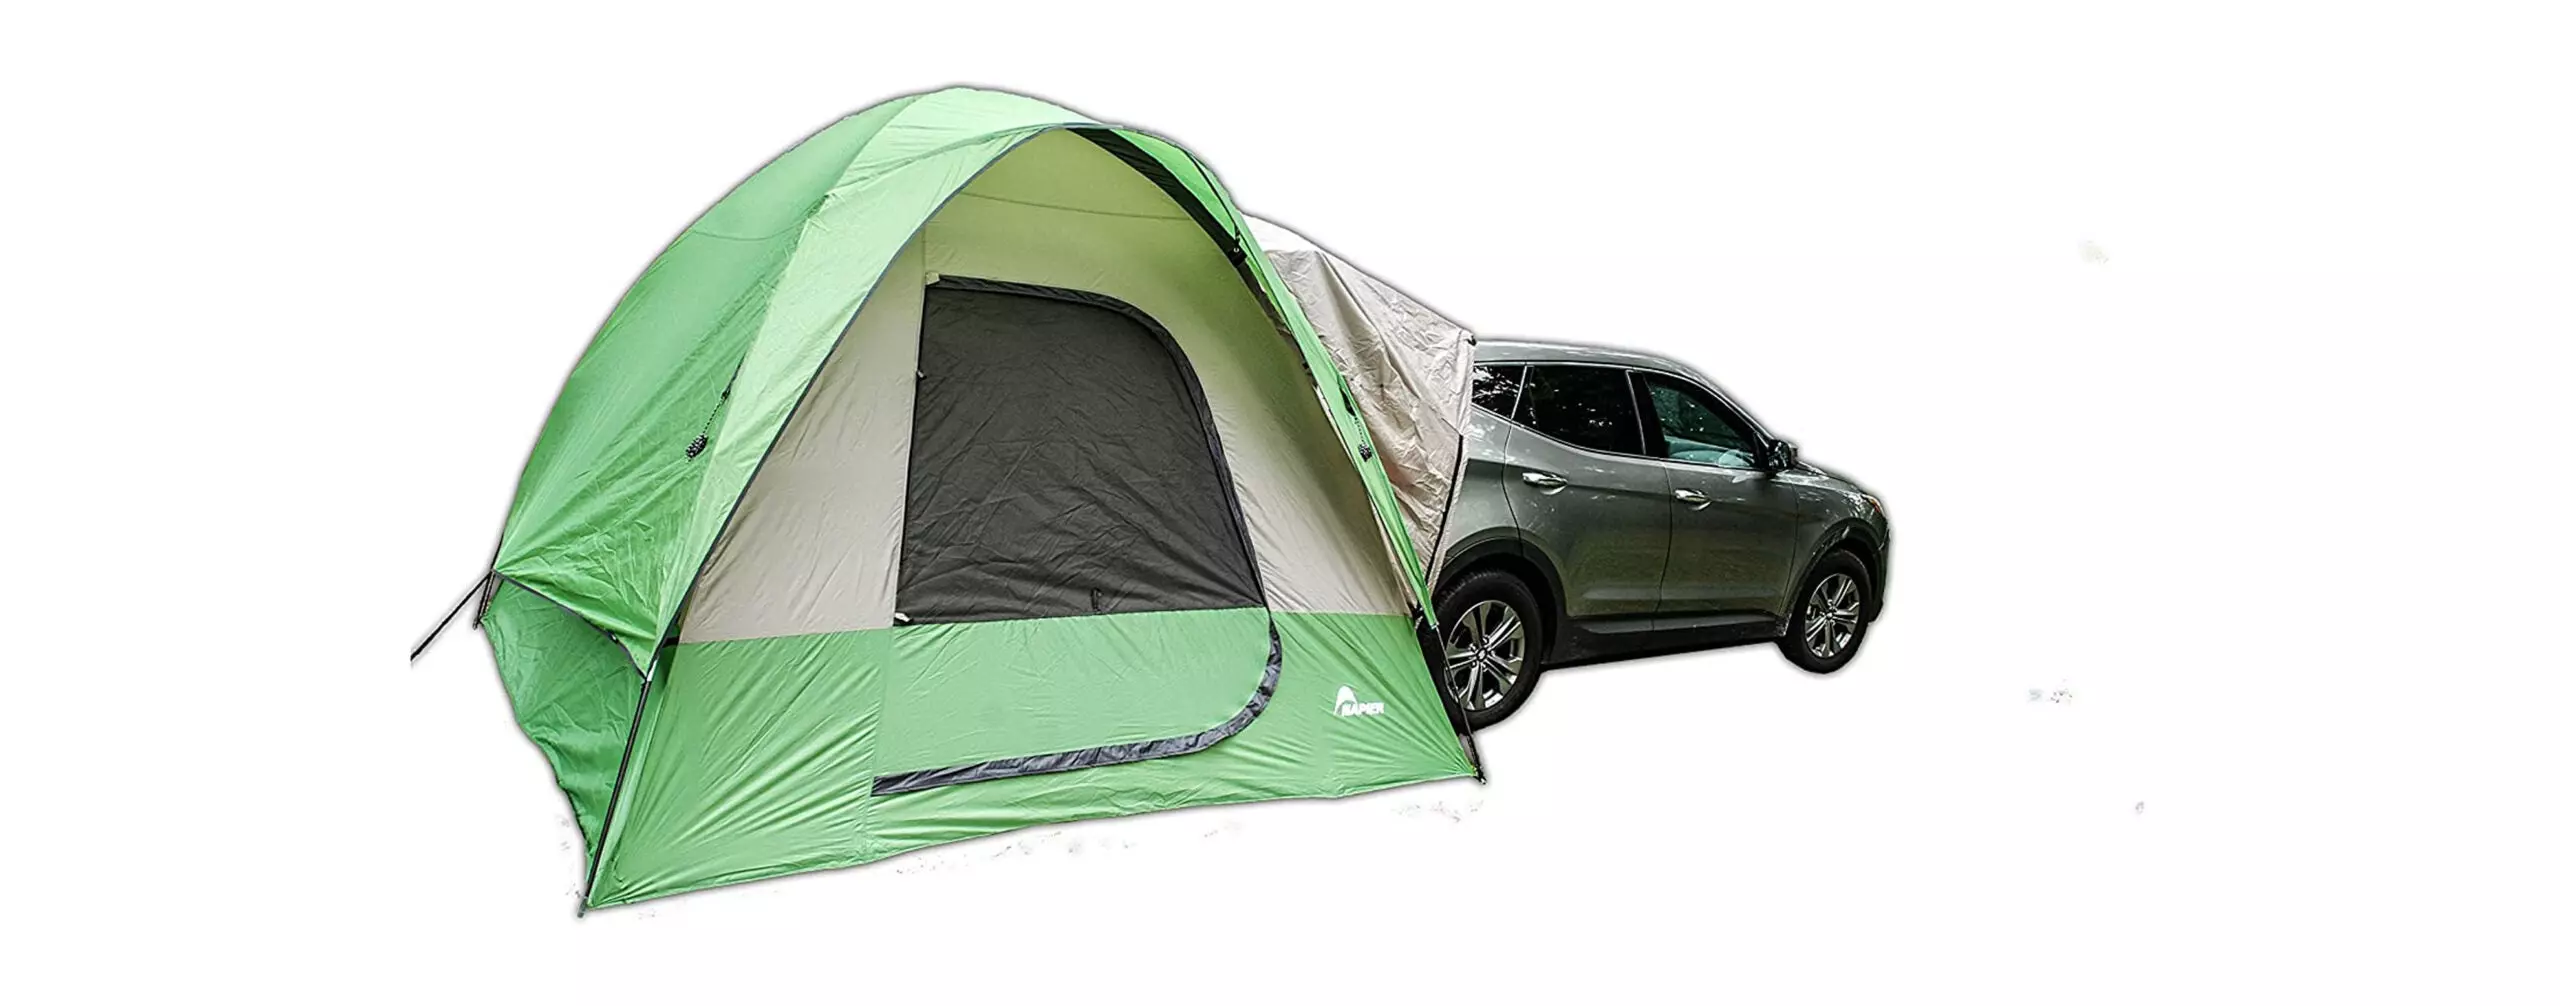 The Best Minivan Tents (Review and Buying Guide) in 2022